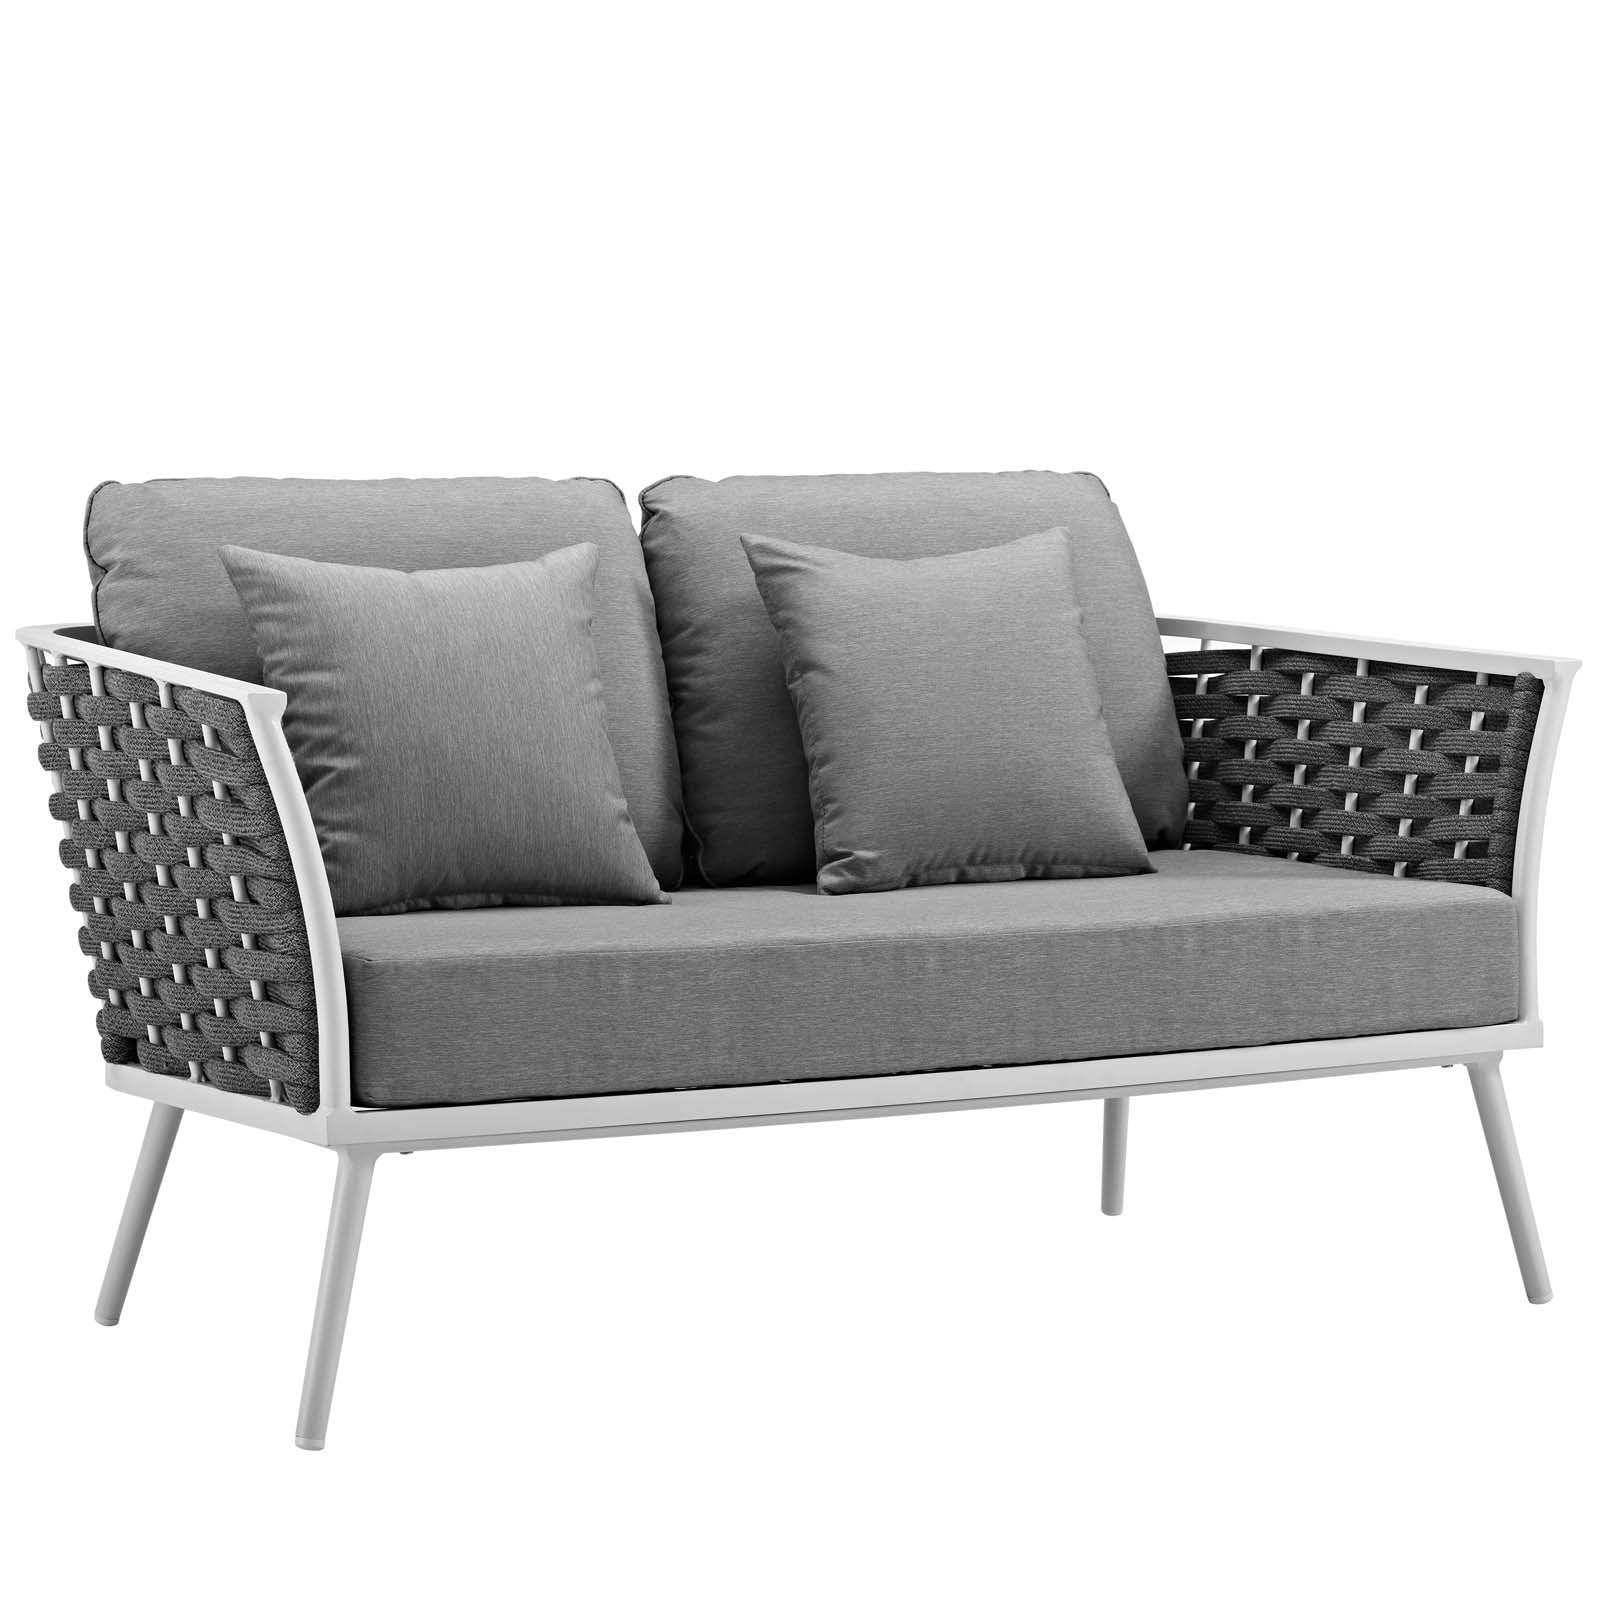 Stance 7 Piece Outdoor Patio Aluminum Sectional Sofa Set - East Shore Modern Home Furnishings